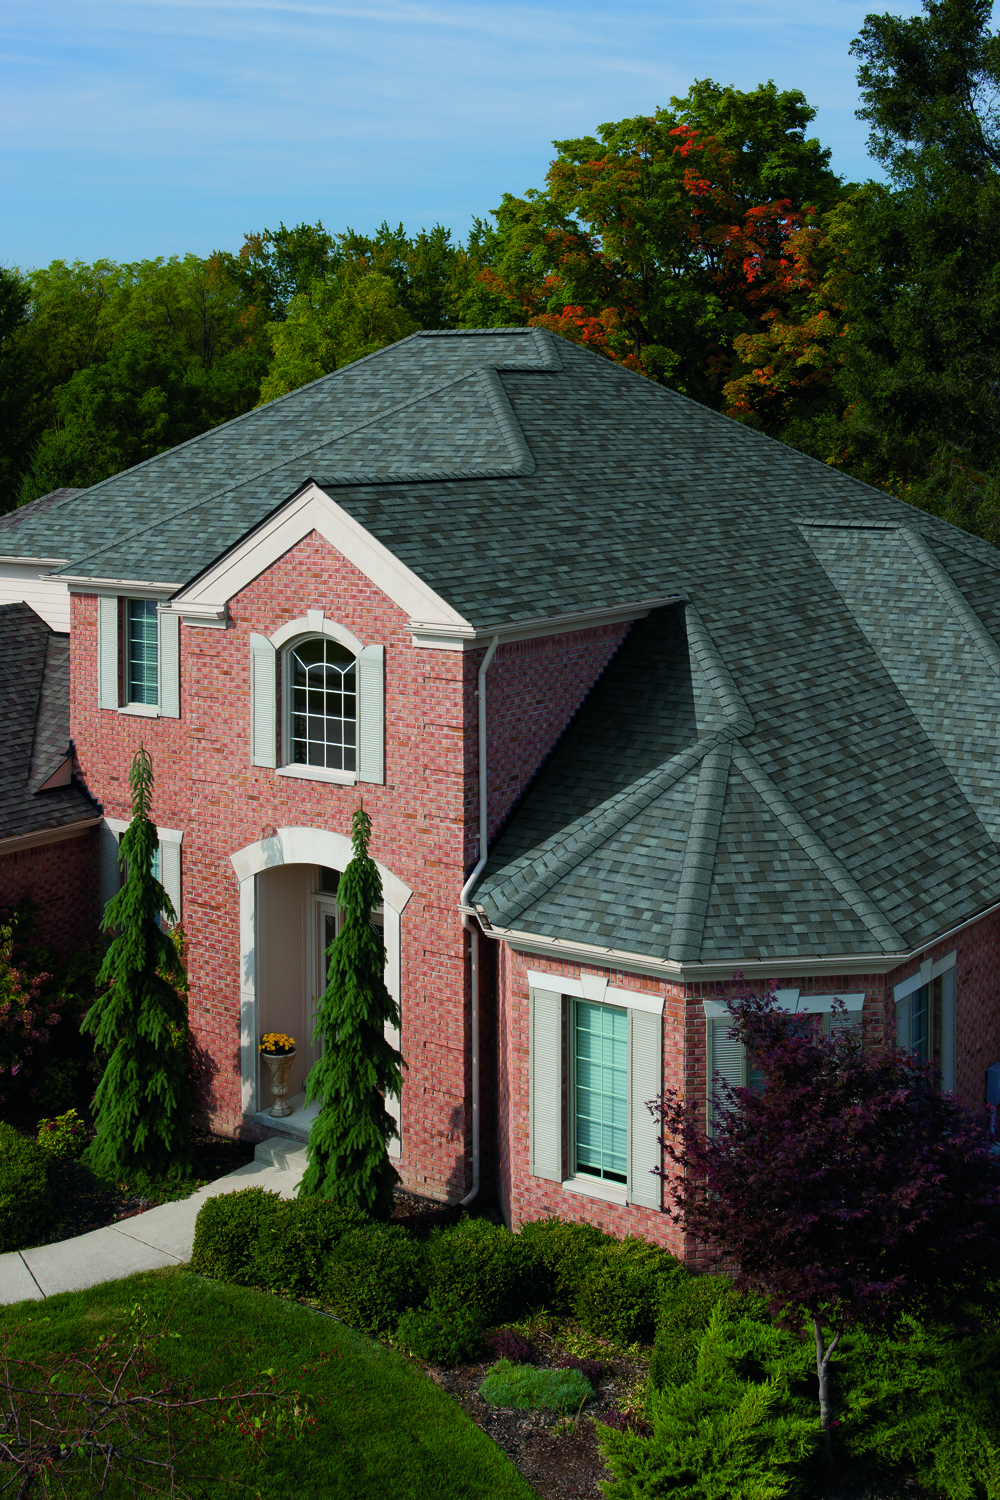 Owens Corning TruDefinition Duration in Quarry Gray